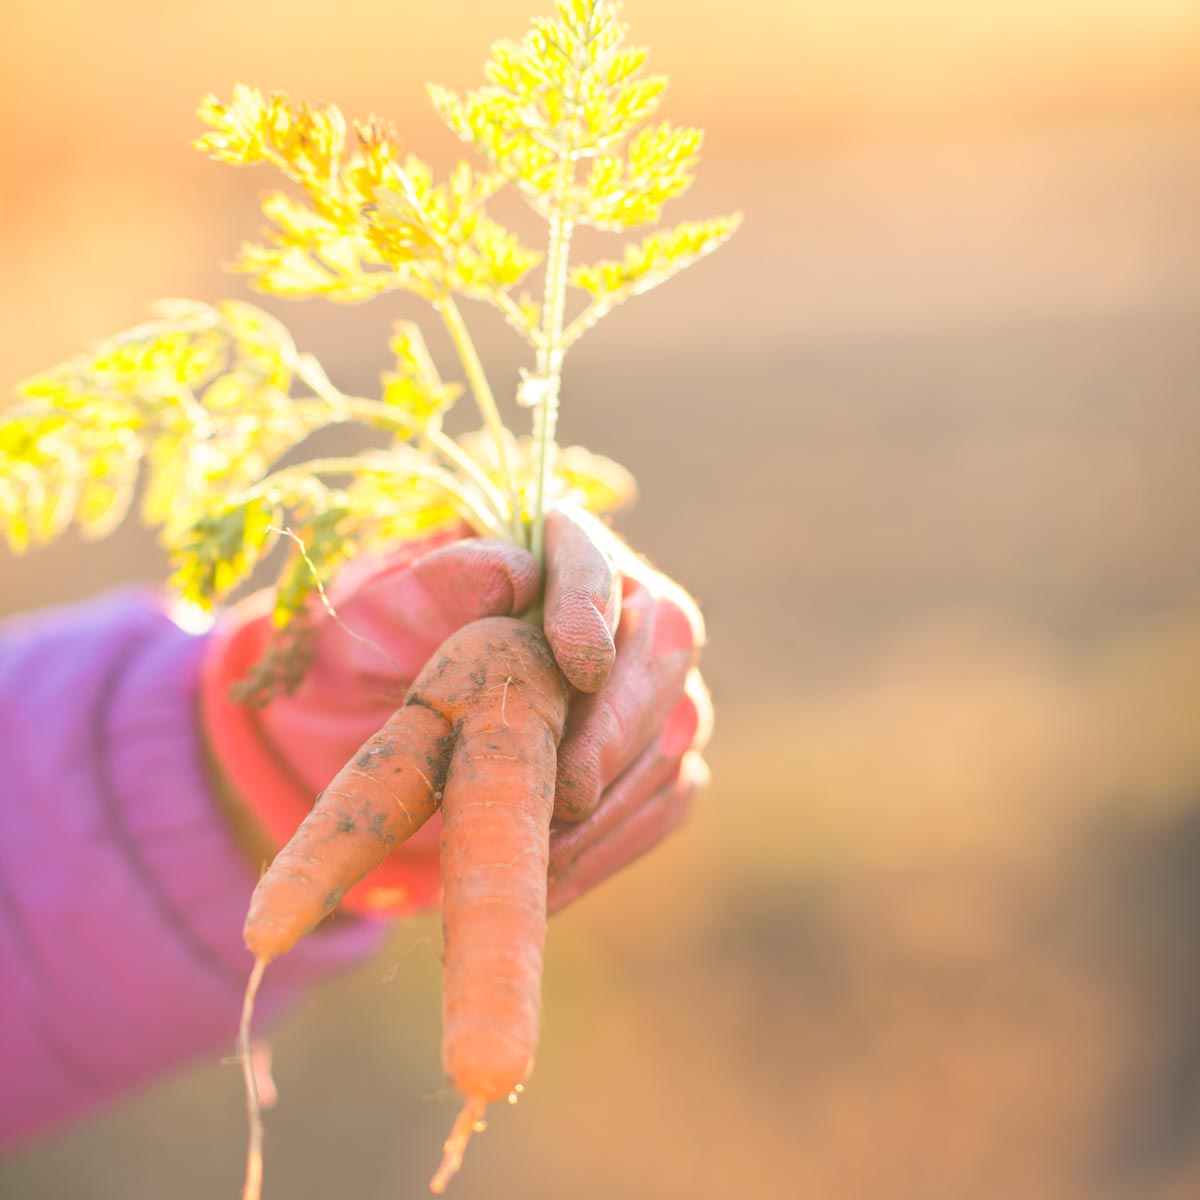 A carrot being held.